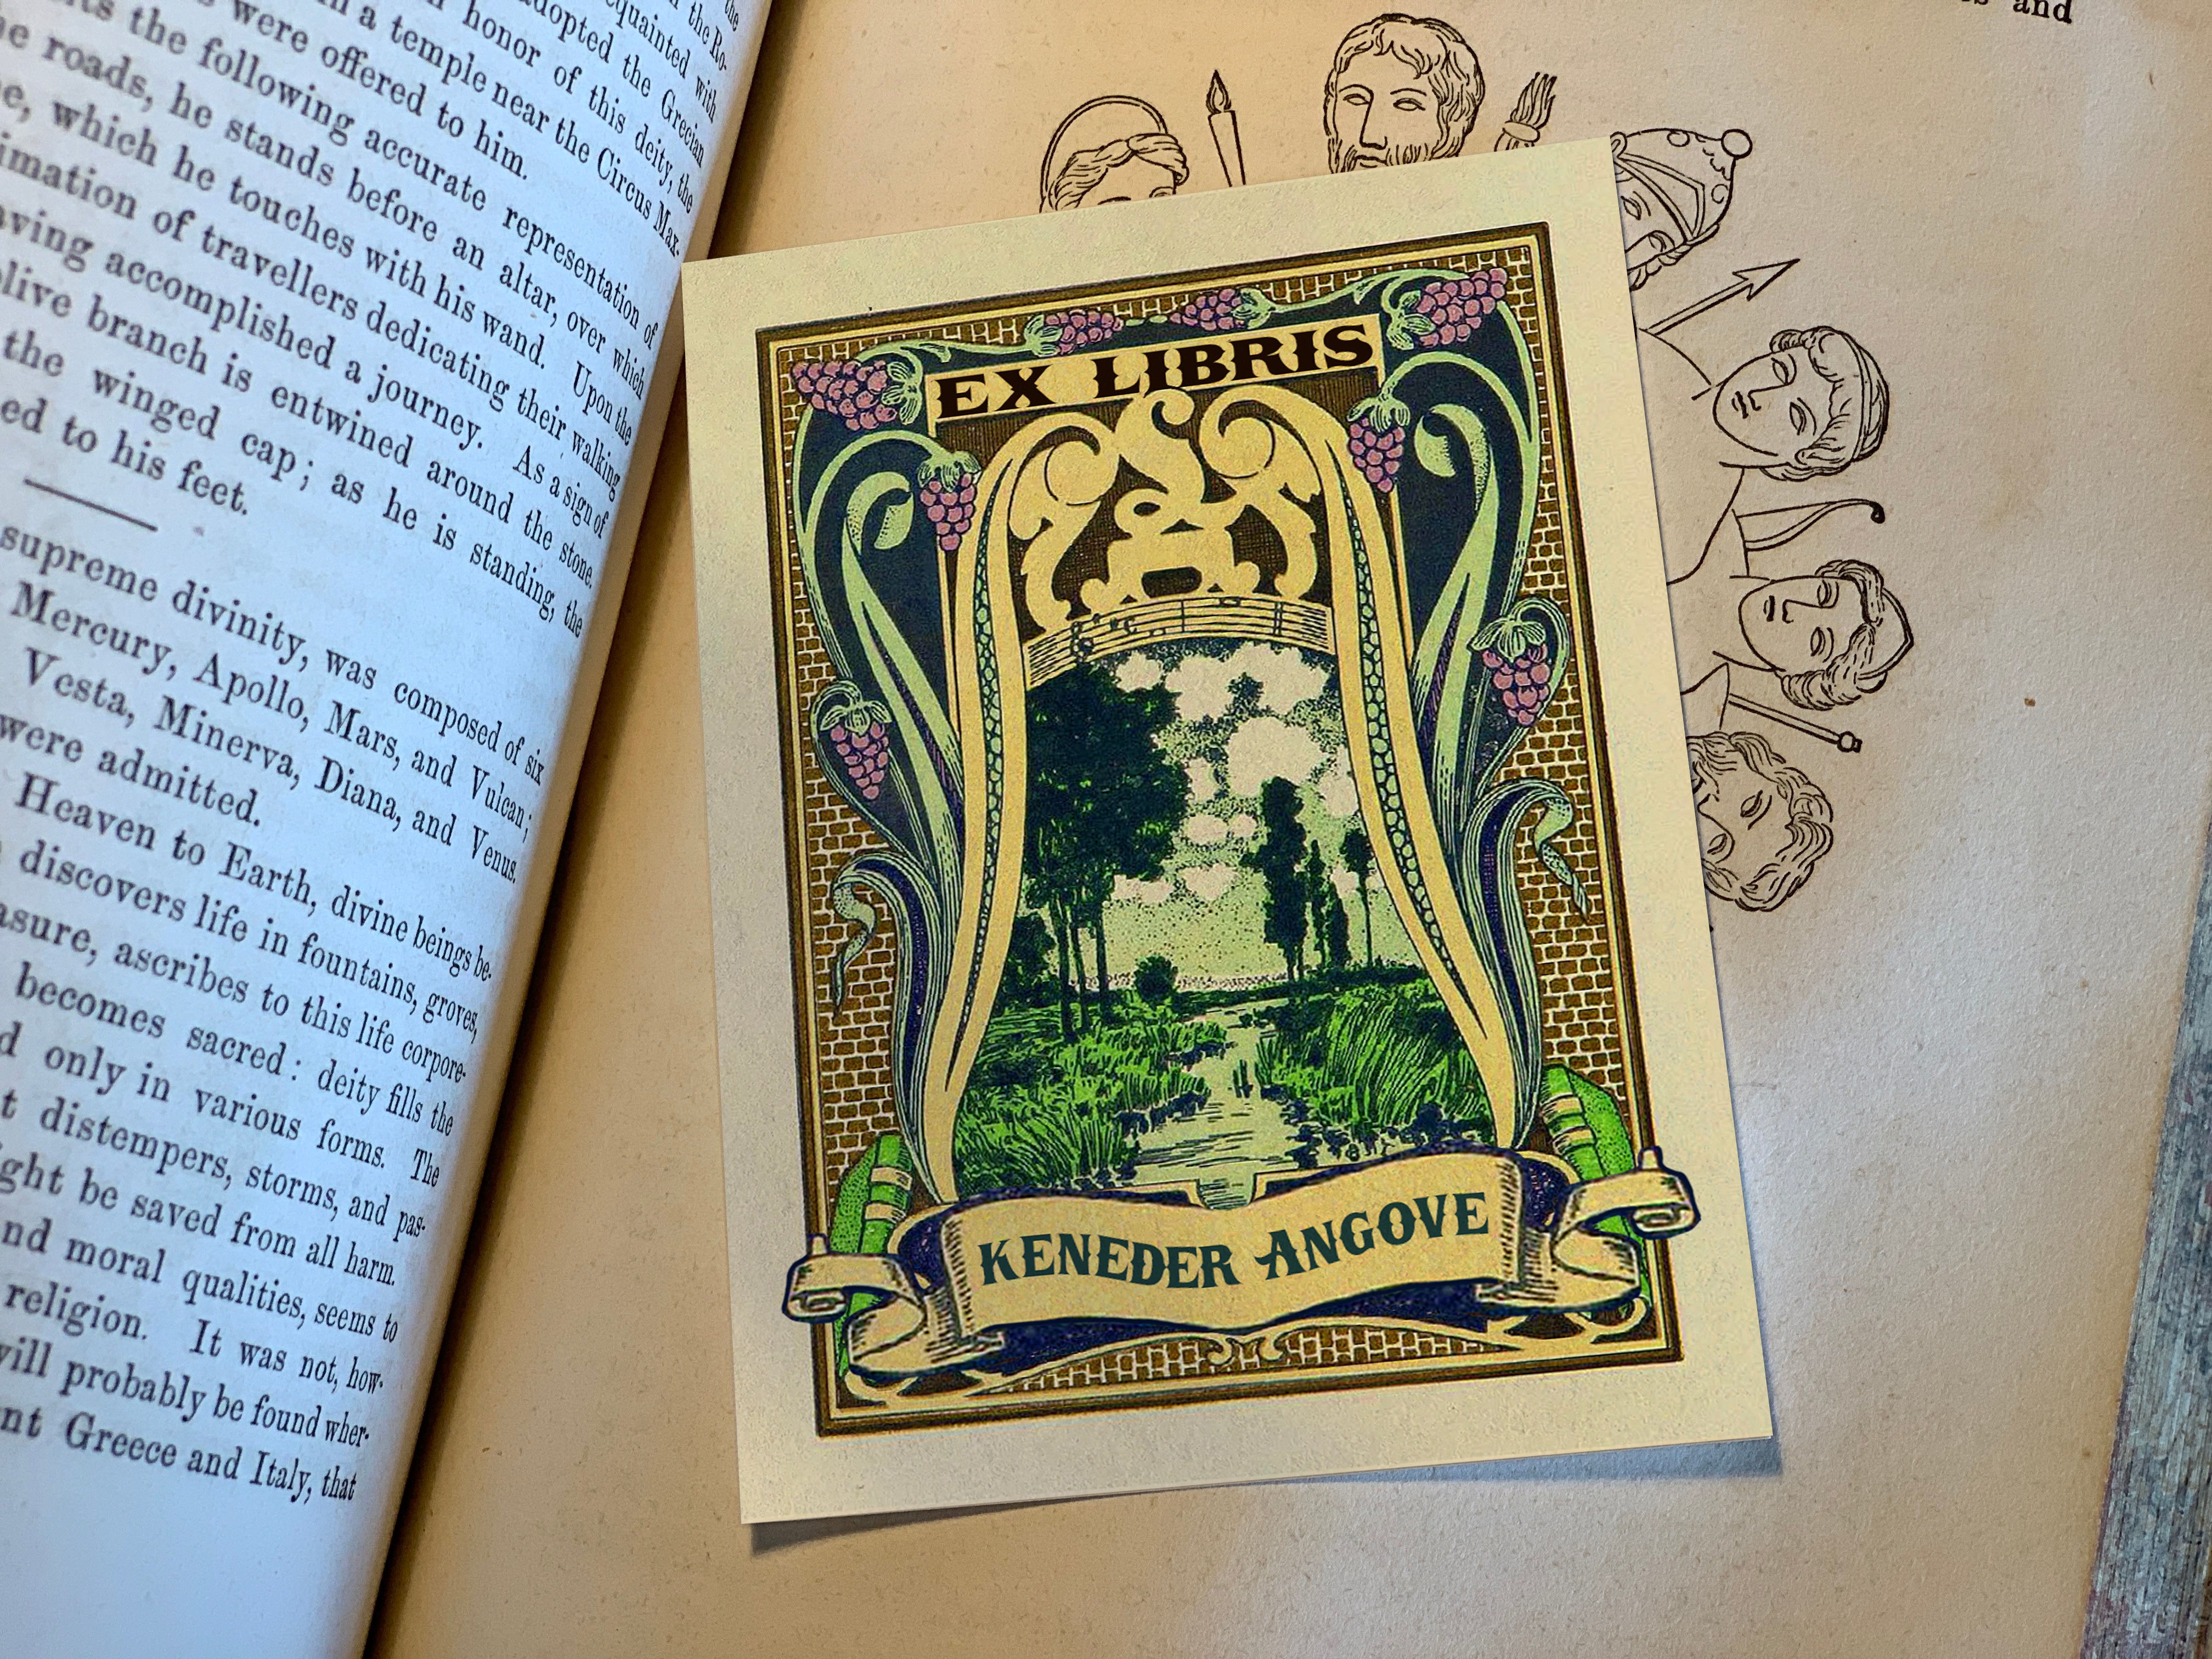 Lake View, Personalized Ex-Libris Bookplates, Crafted on Traditional Gummed Paper, 3in x 4in, Set of 30